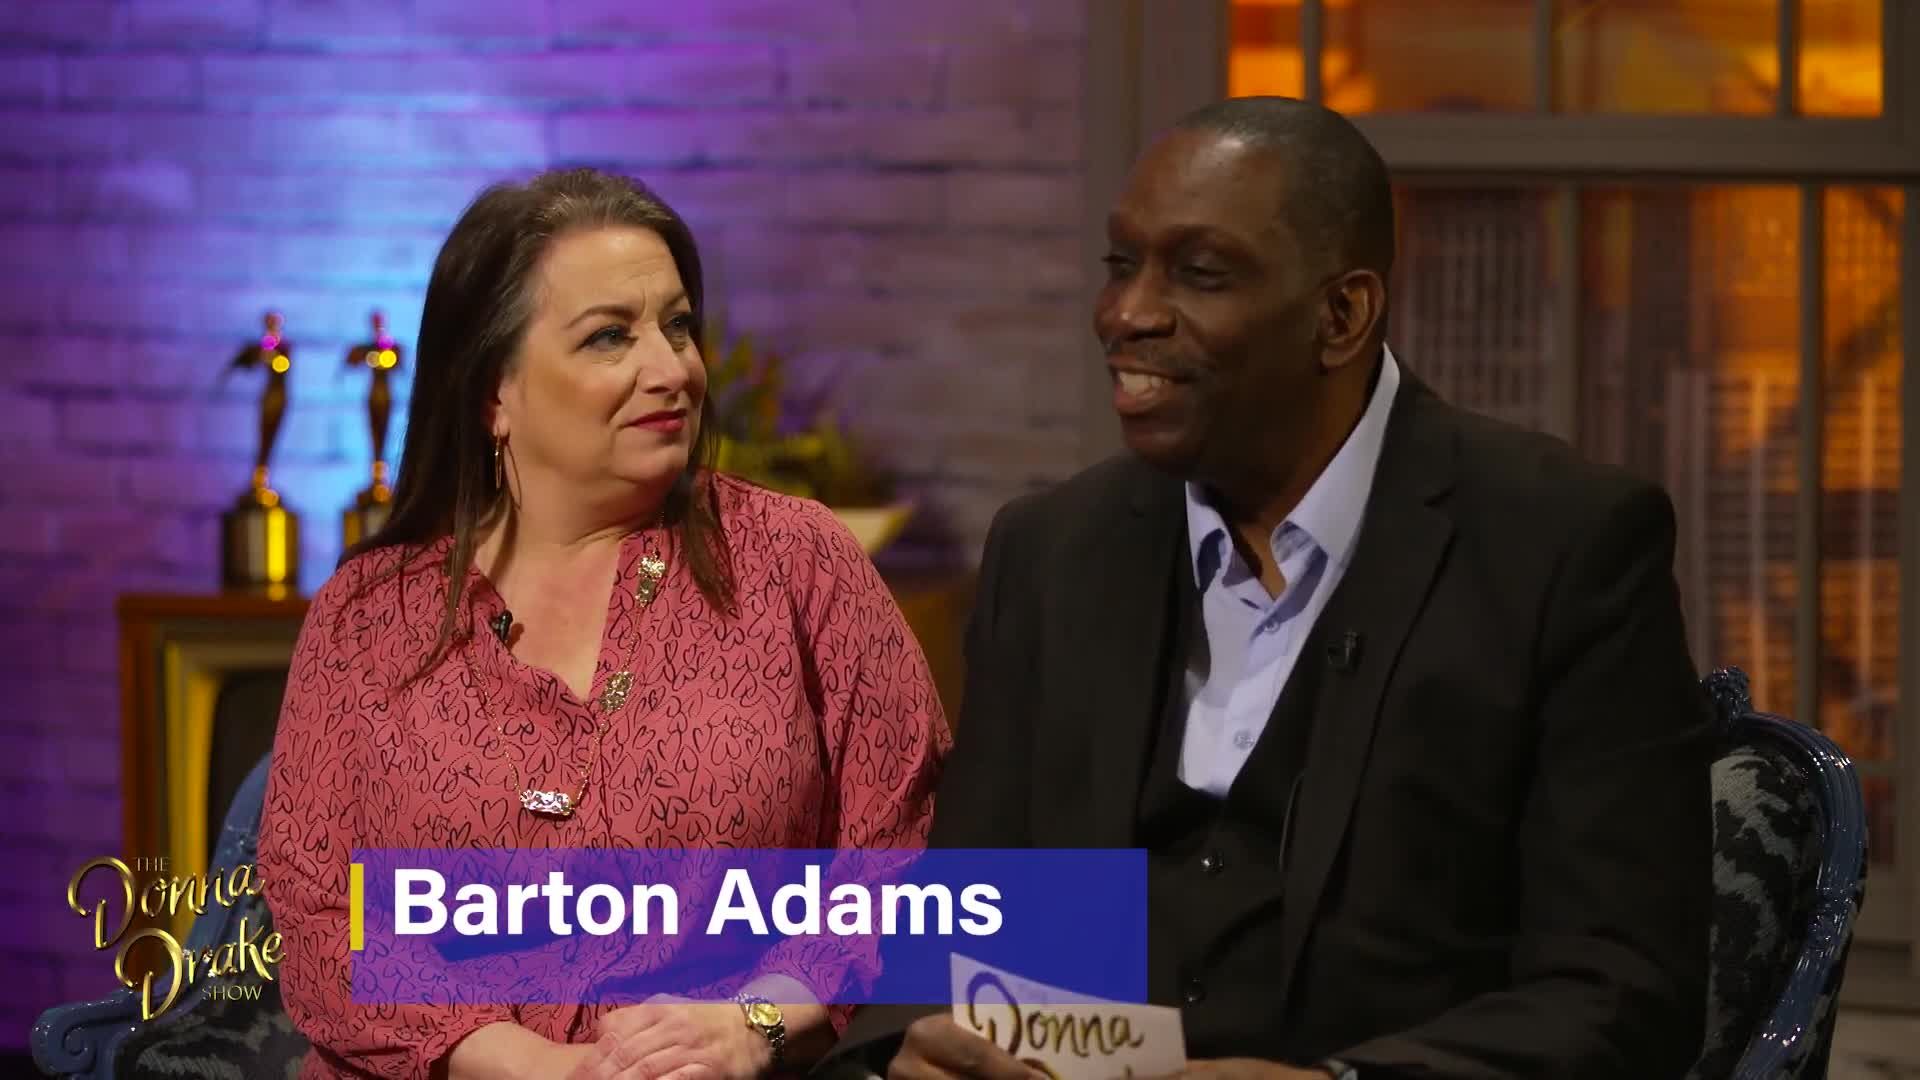 The Donna Drake Show and Barton J. Adams Pay Homage to Legendary Jazz Pianist Danny Mixon